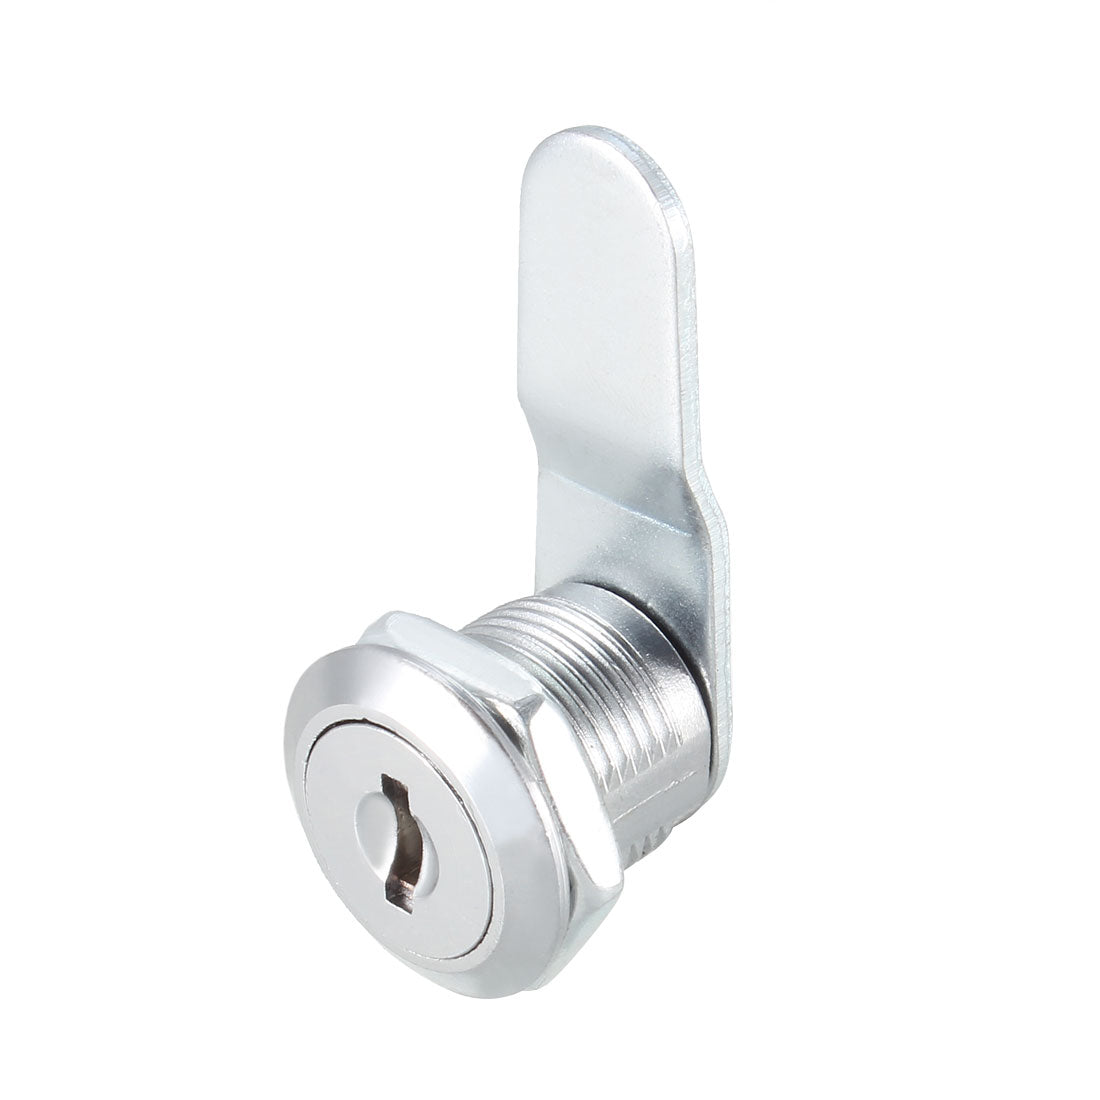 uxcell Uxcell Cam Lock 16mm Cylinder Length Fit on Max 5/16-inch Panel Keyed Different 4Pcs